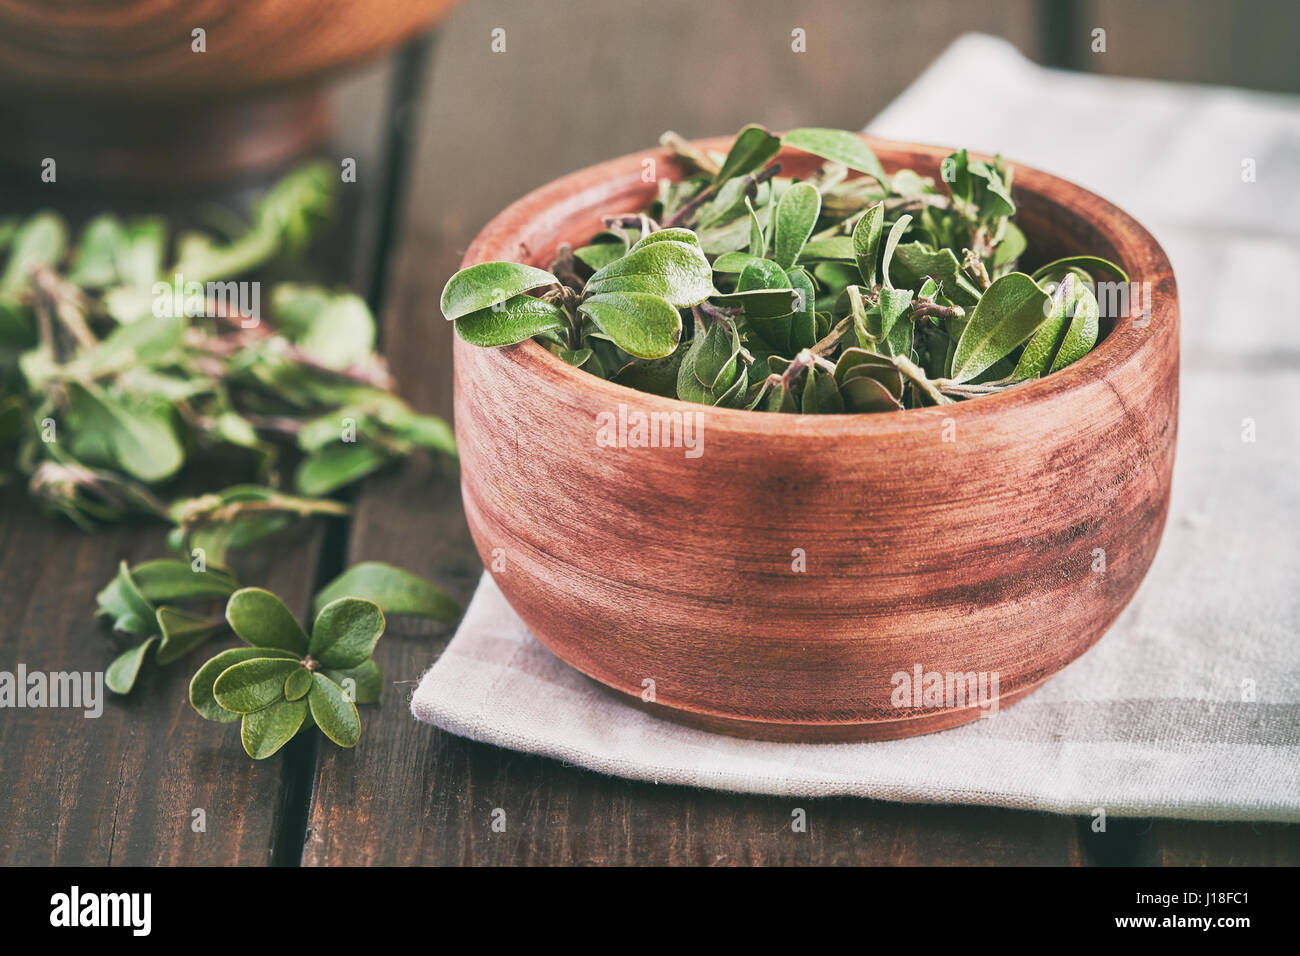 Bearberry leaves (medicinal plant Arctostaphylos uva-ursi) in wooden bowl Stock Photo